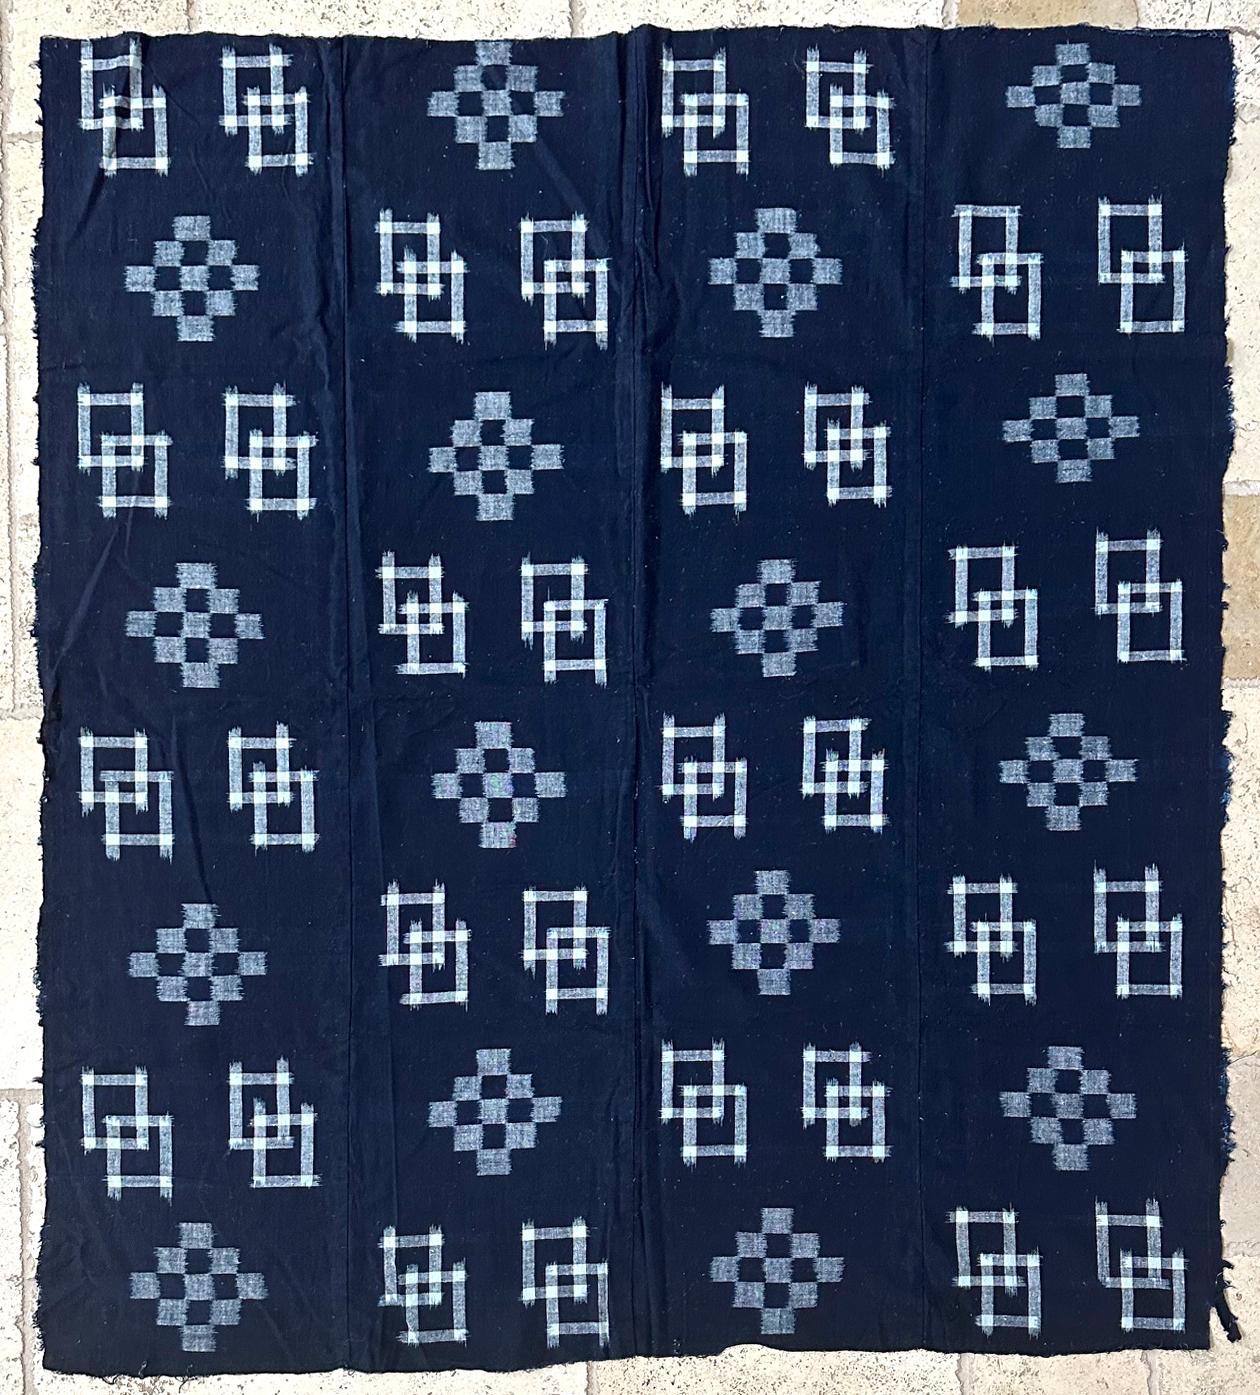 A Japanese woven cotton textile panel with white pattern on indigo background circa 1900-20s (end of Meiji to Tasho period). The panel was joined by four vertical stripes and was traditionally used to make the Futonji (futon coverlet). The weaving